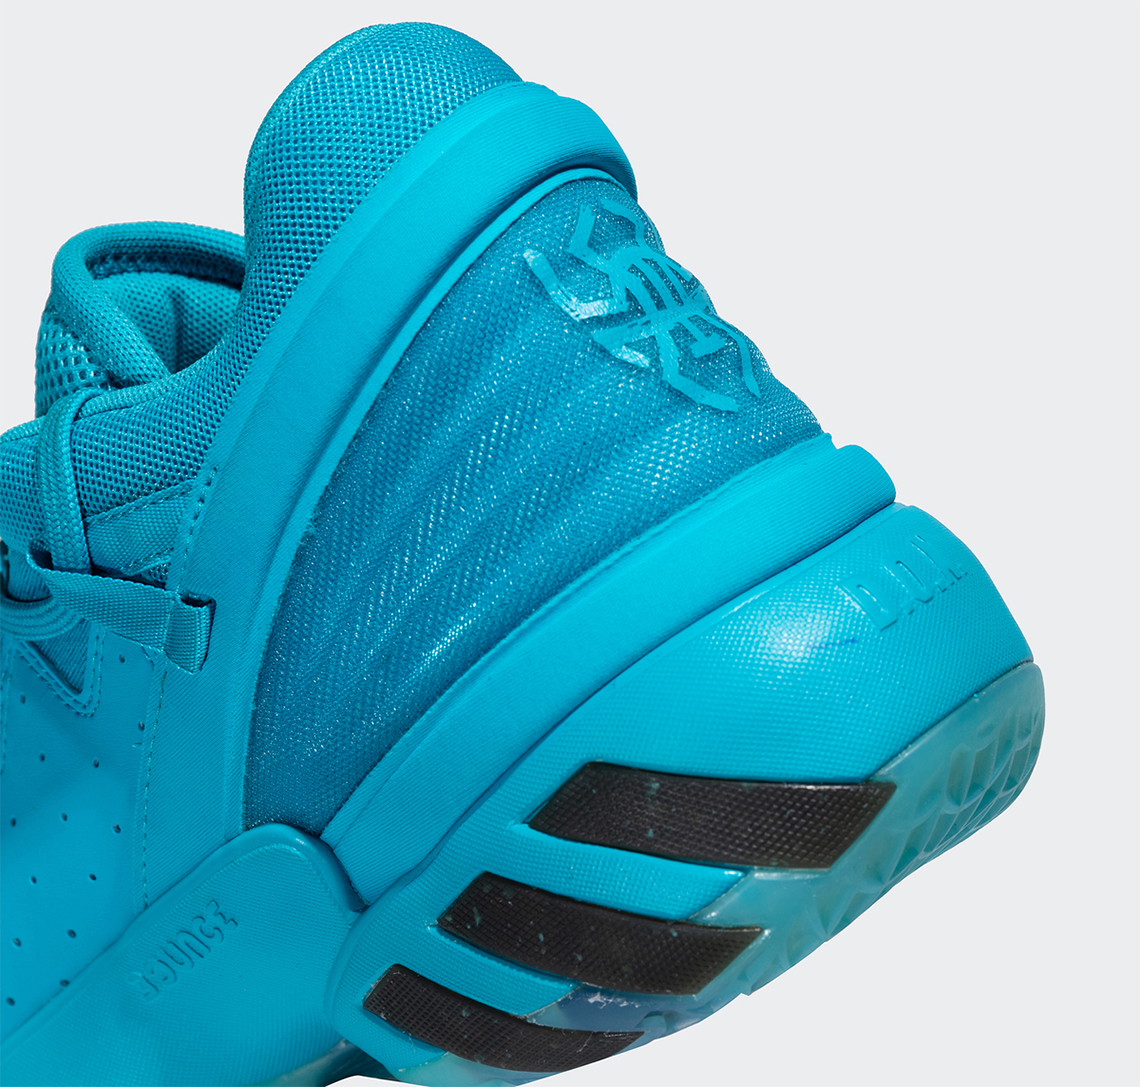 Adidas Don Issue 2 Crayon Blue 8